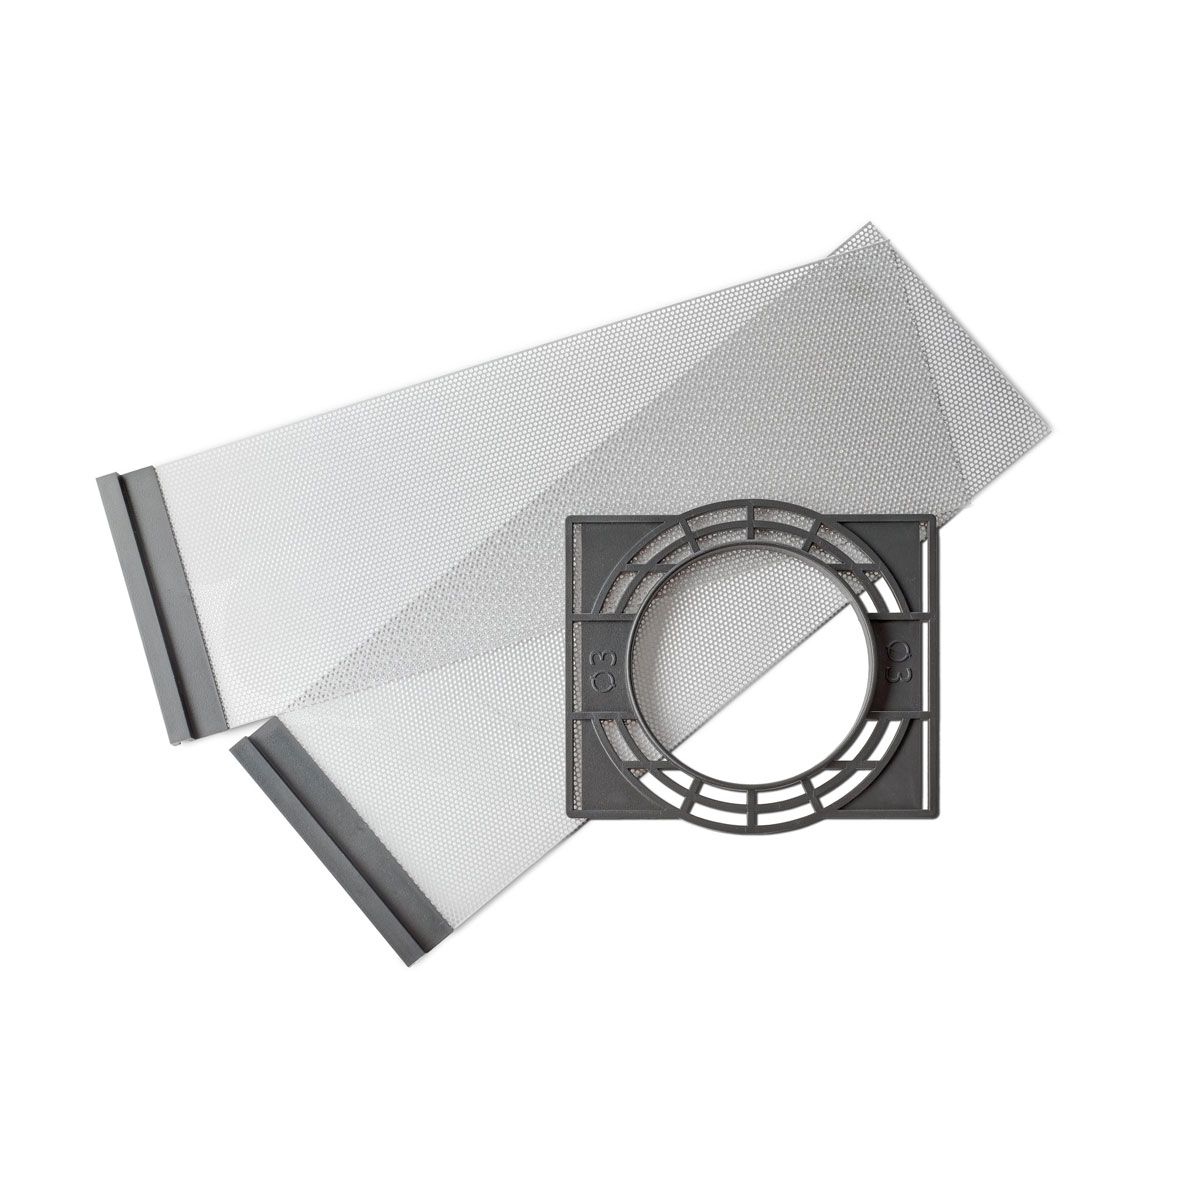 MartinLogan Pre-Construction Bracket for IC3 and IC3-AW In-Ceiling Speakers